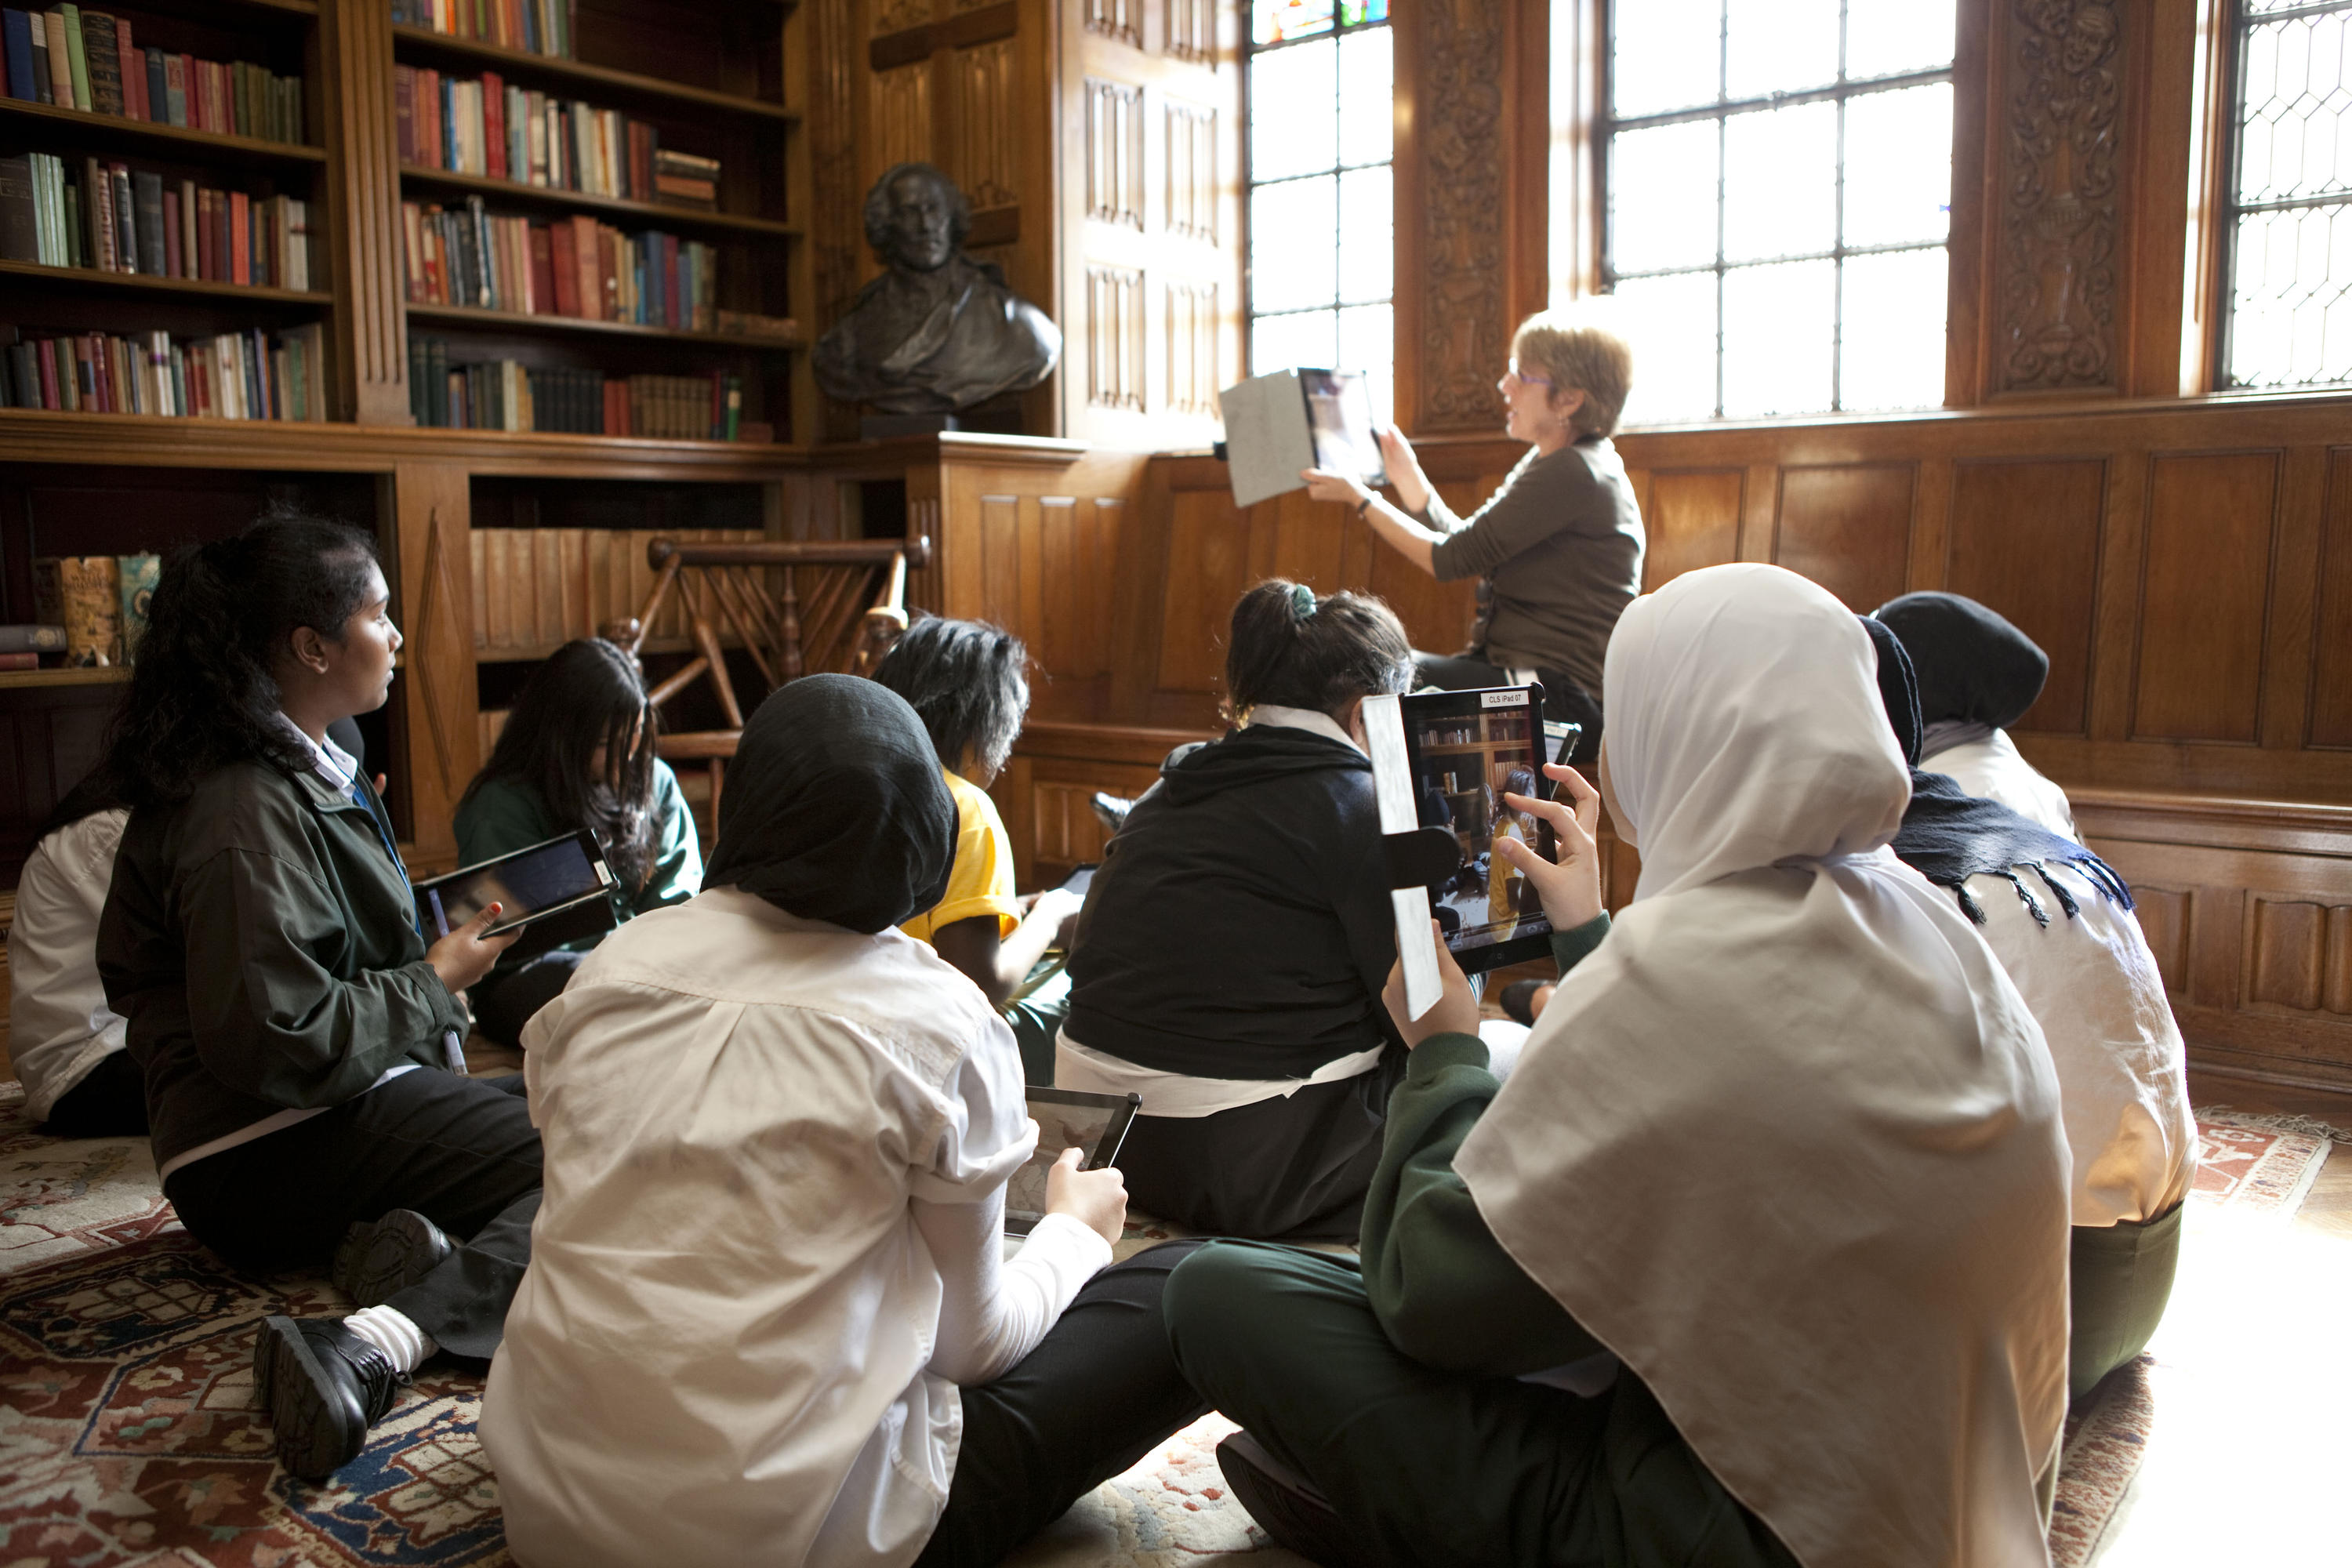 Students sitting in the State Library Shakespeare Room looking at iPads